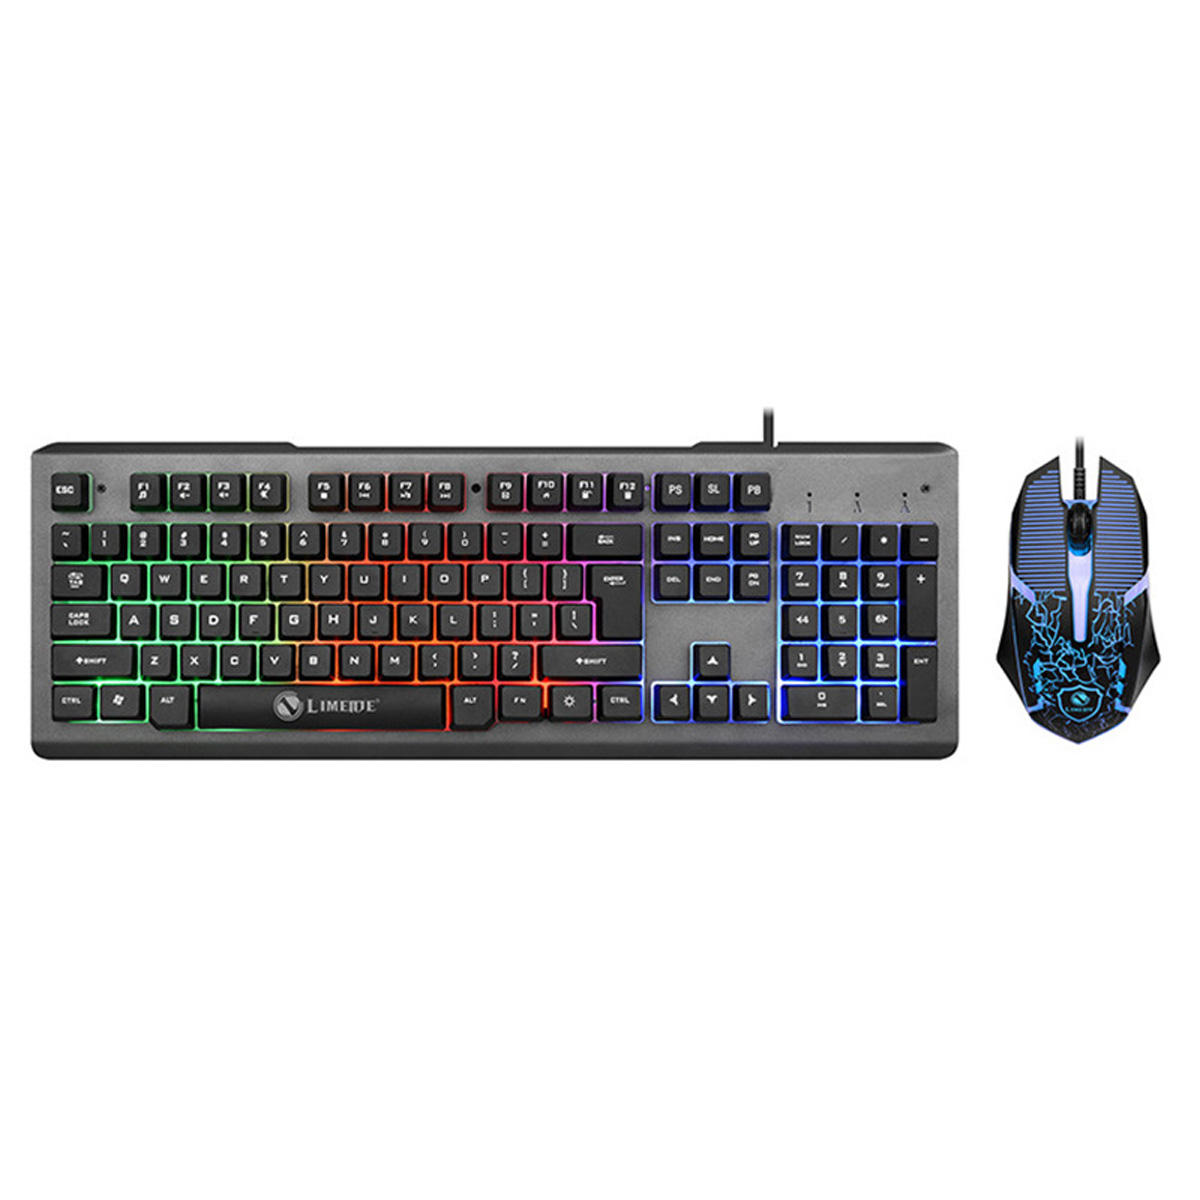 Colorful Backlight USB Wired Gaming Keyboard 2400DPI LED Gaming Mouse Combo for PC Game E-sports